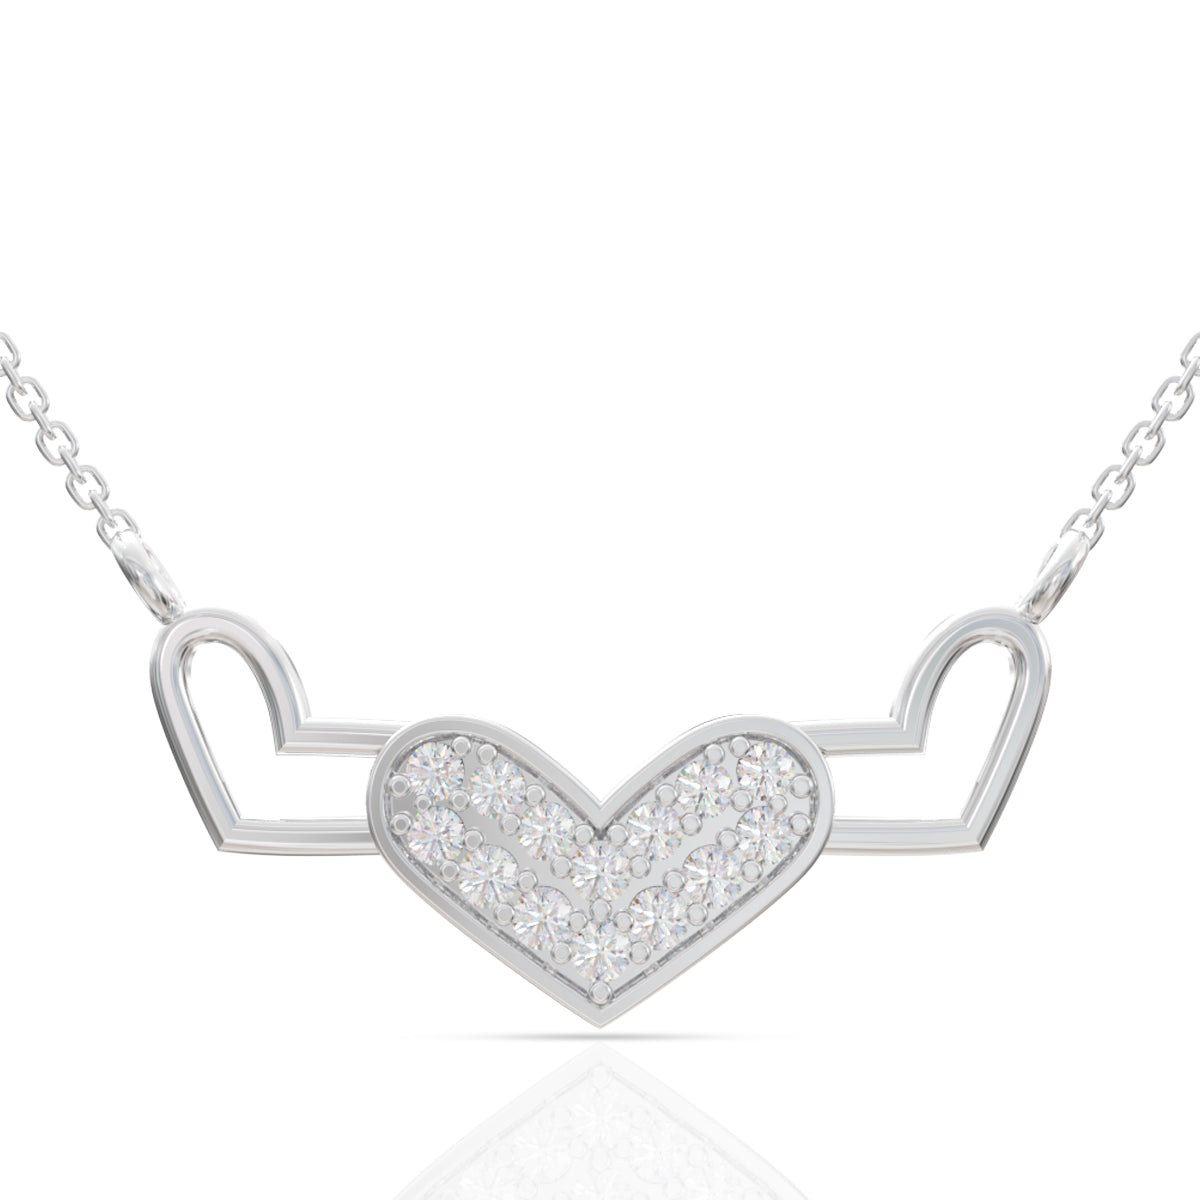 Silver Ornate Hearts Pendant with Link Chain